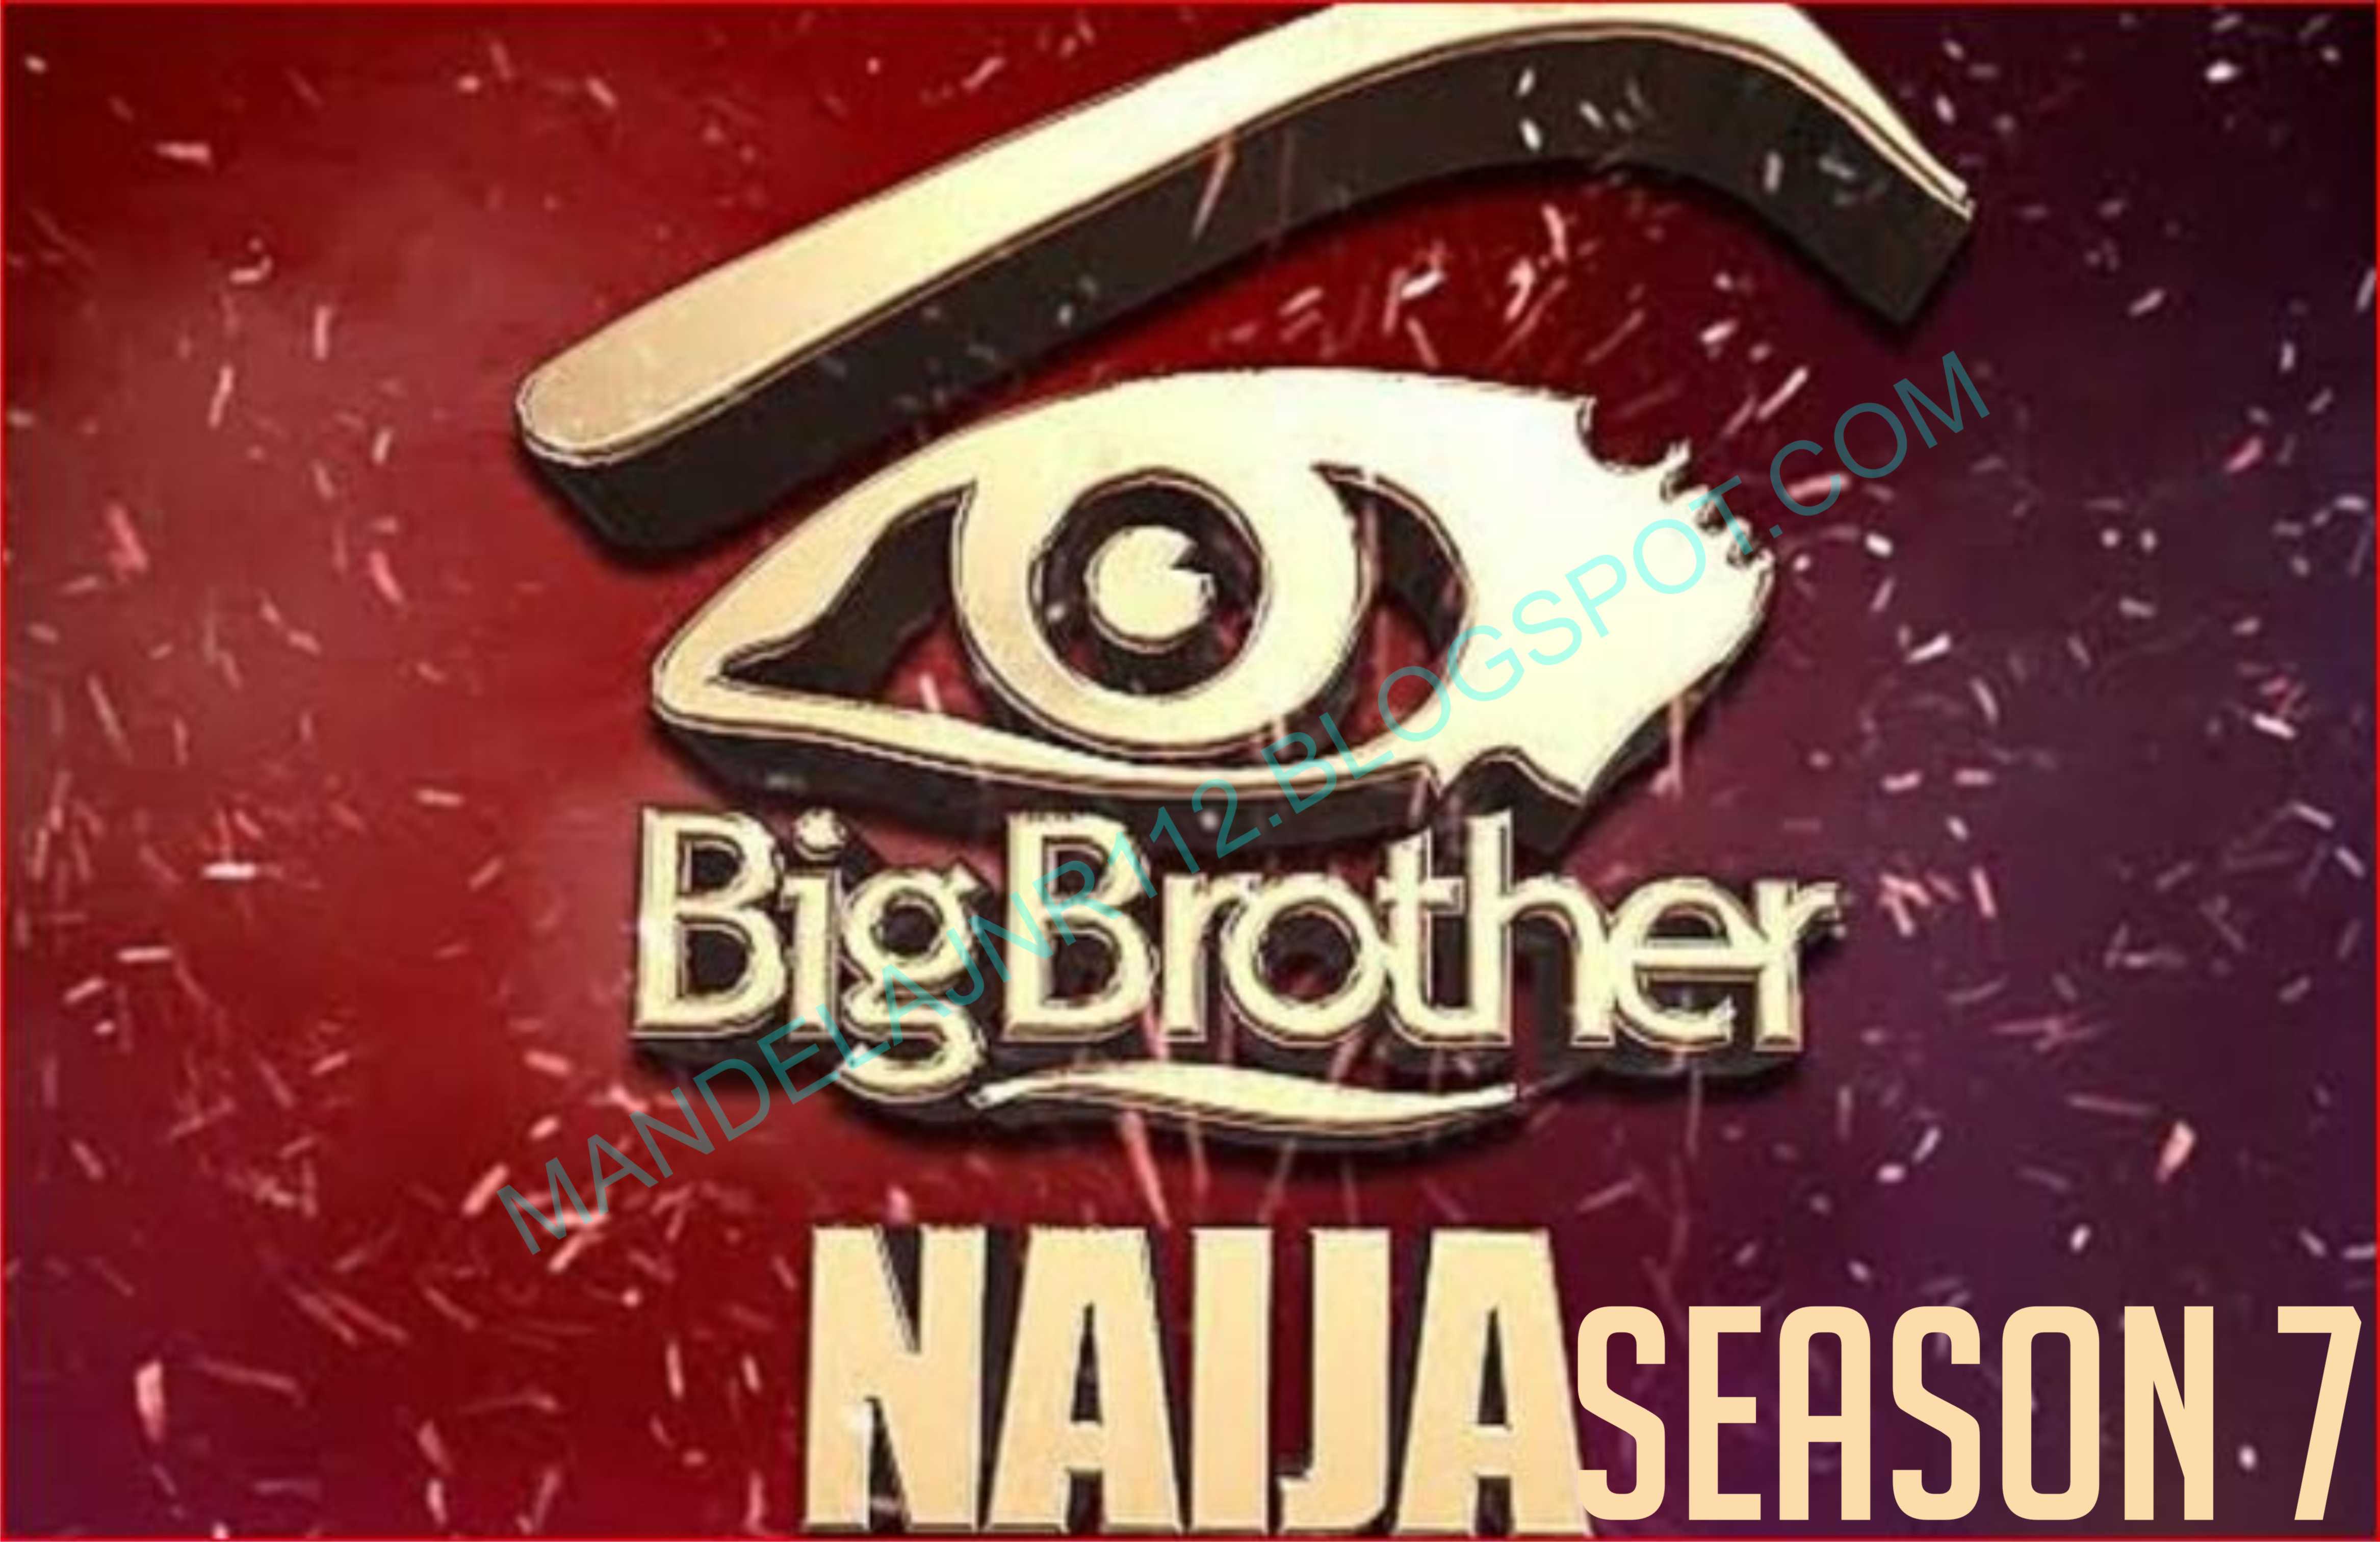 BBNaija Season 7: Excitement, show, interests as unscripted TV drama brings today back